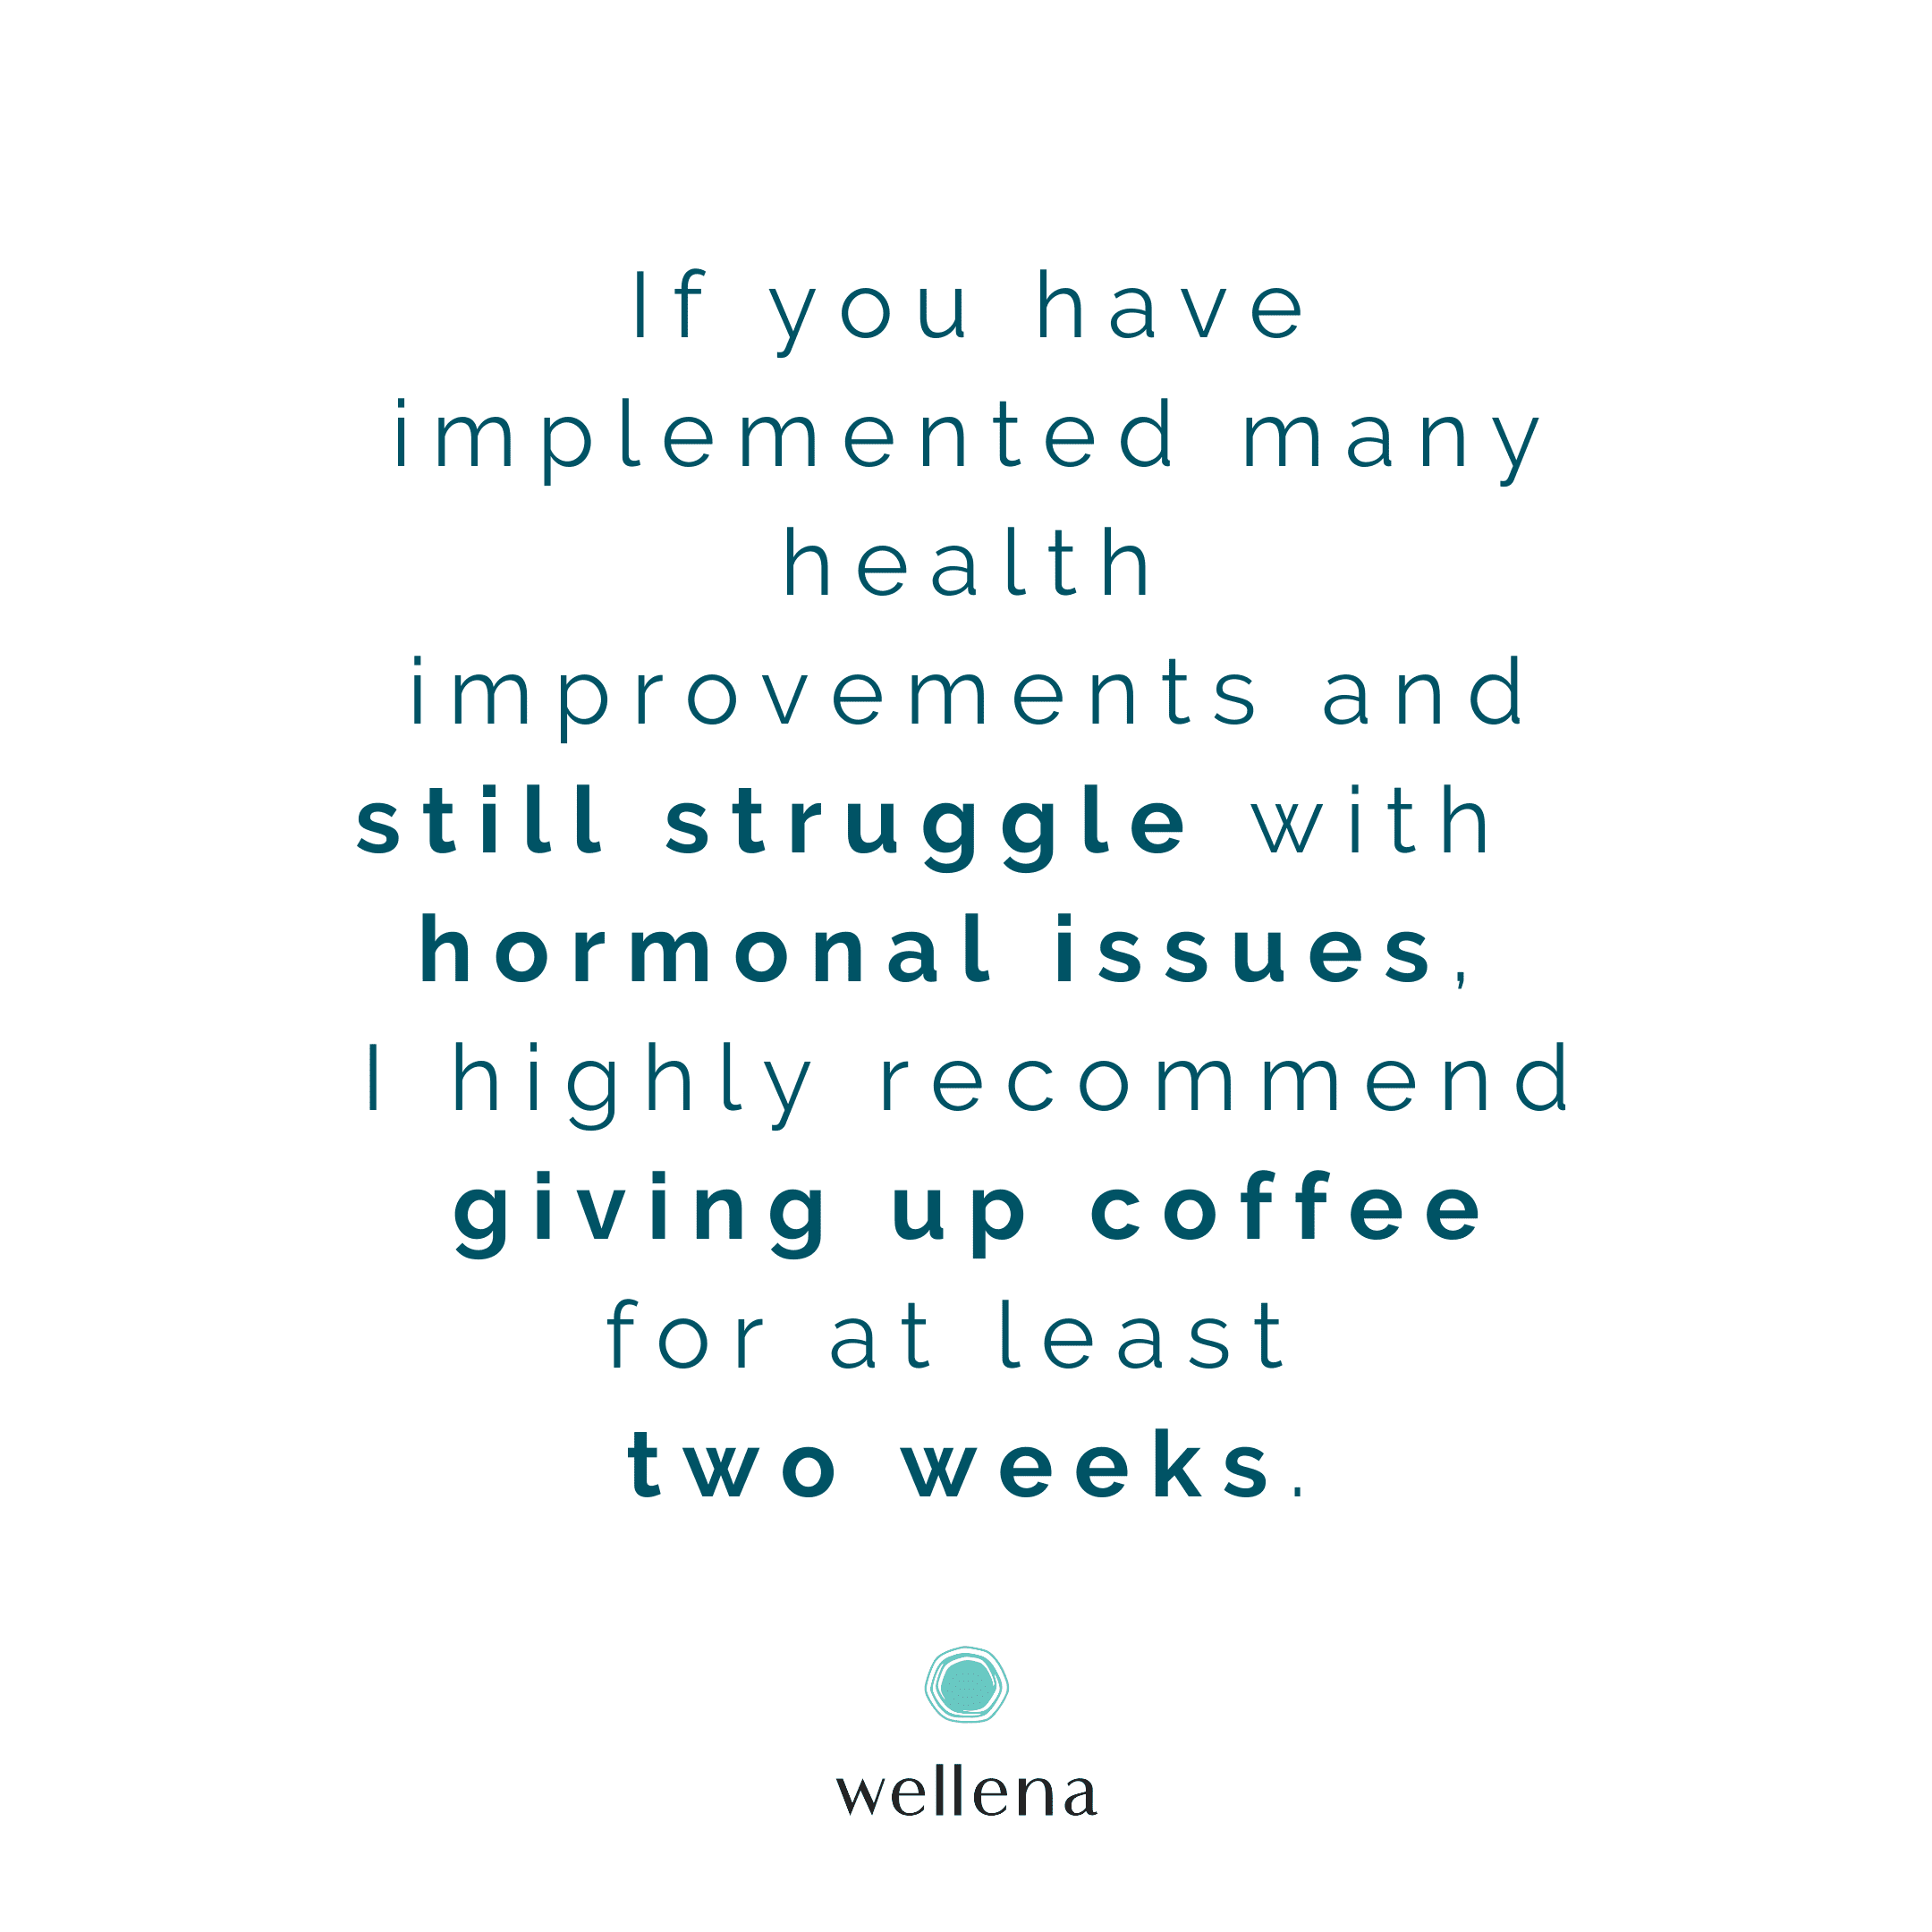 If you have implemented many health improvements and still struggle with hormonal issues, I highly recommend giving up coffee for at least two weeks.